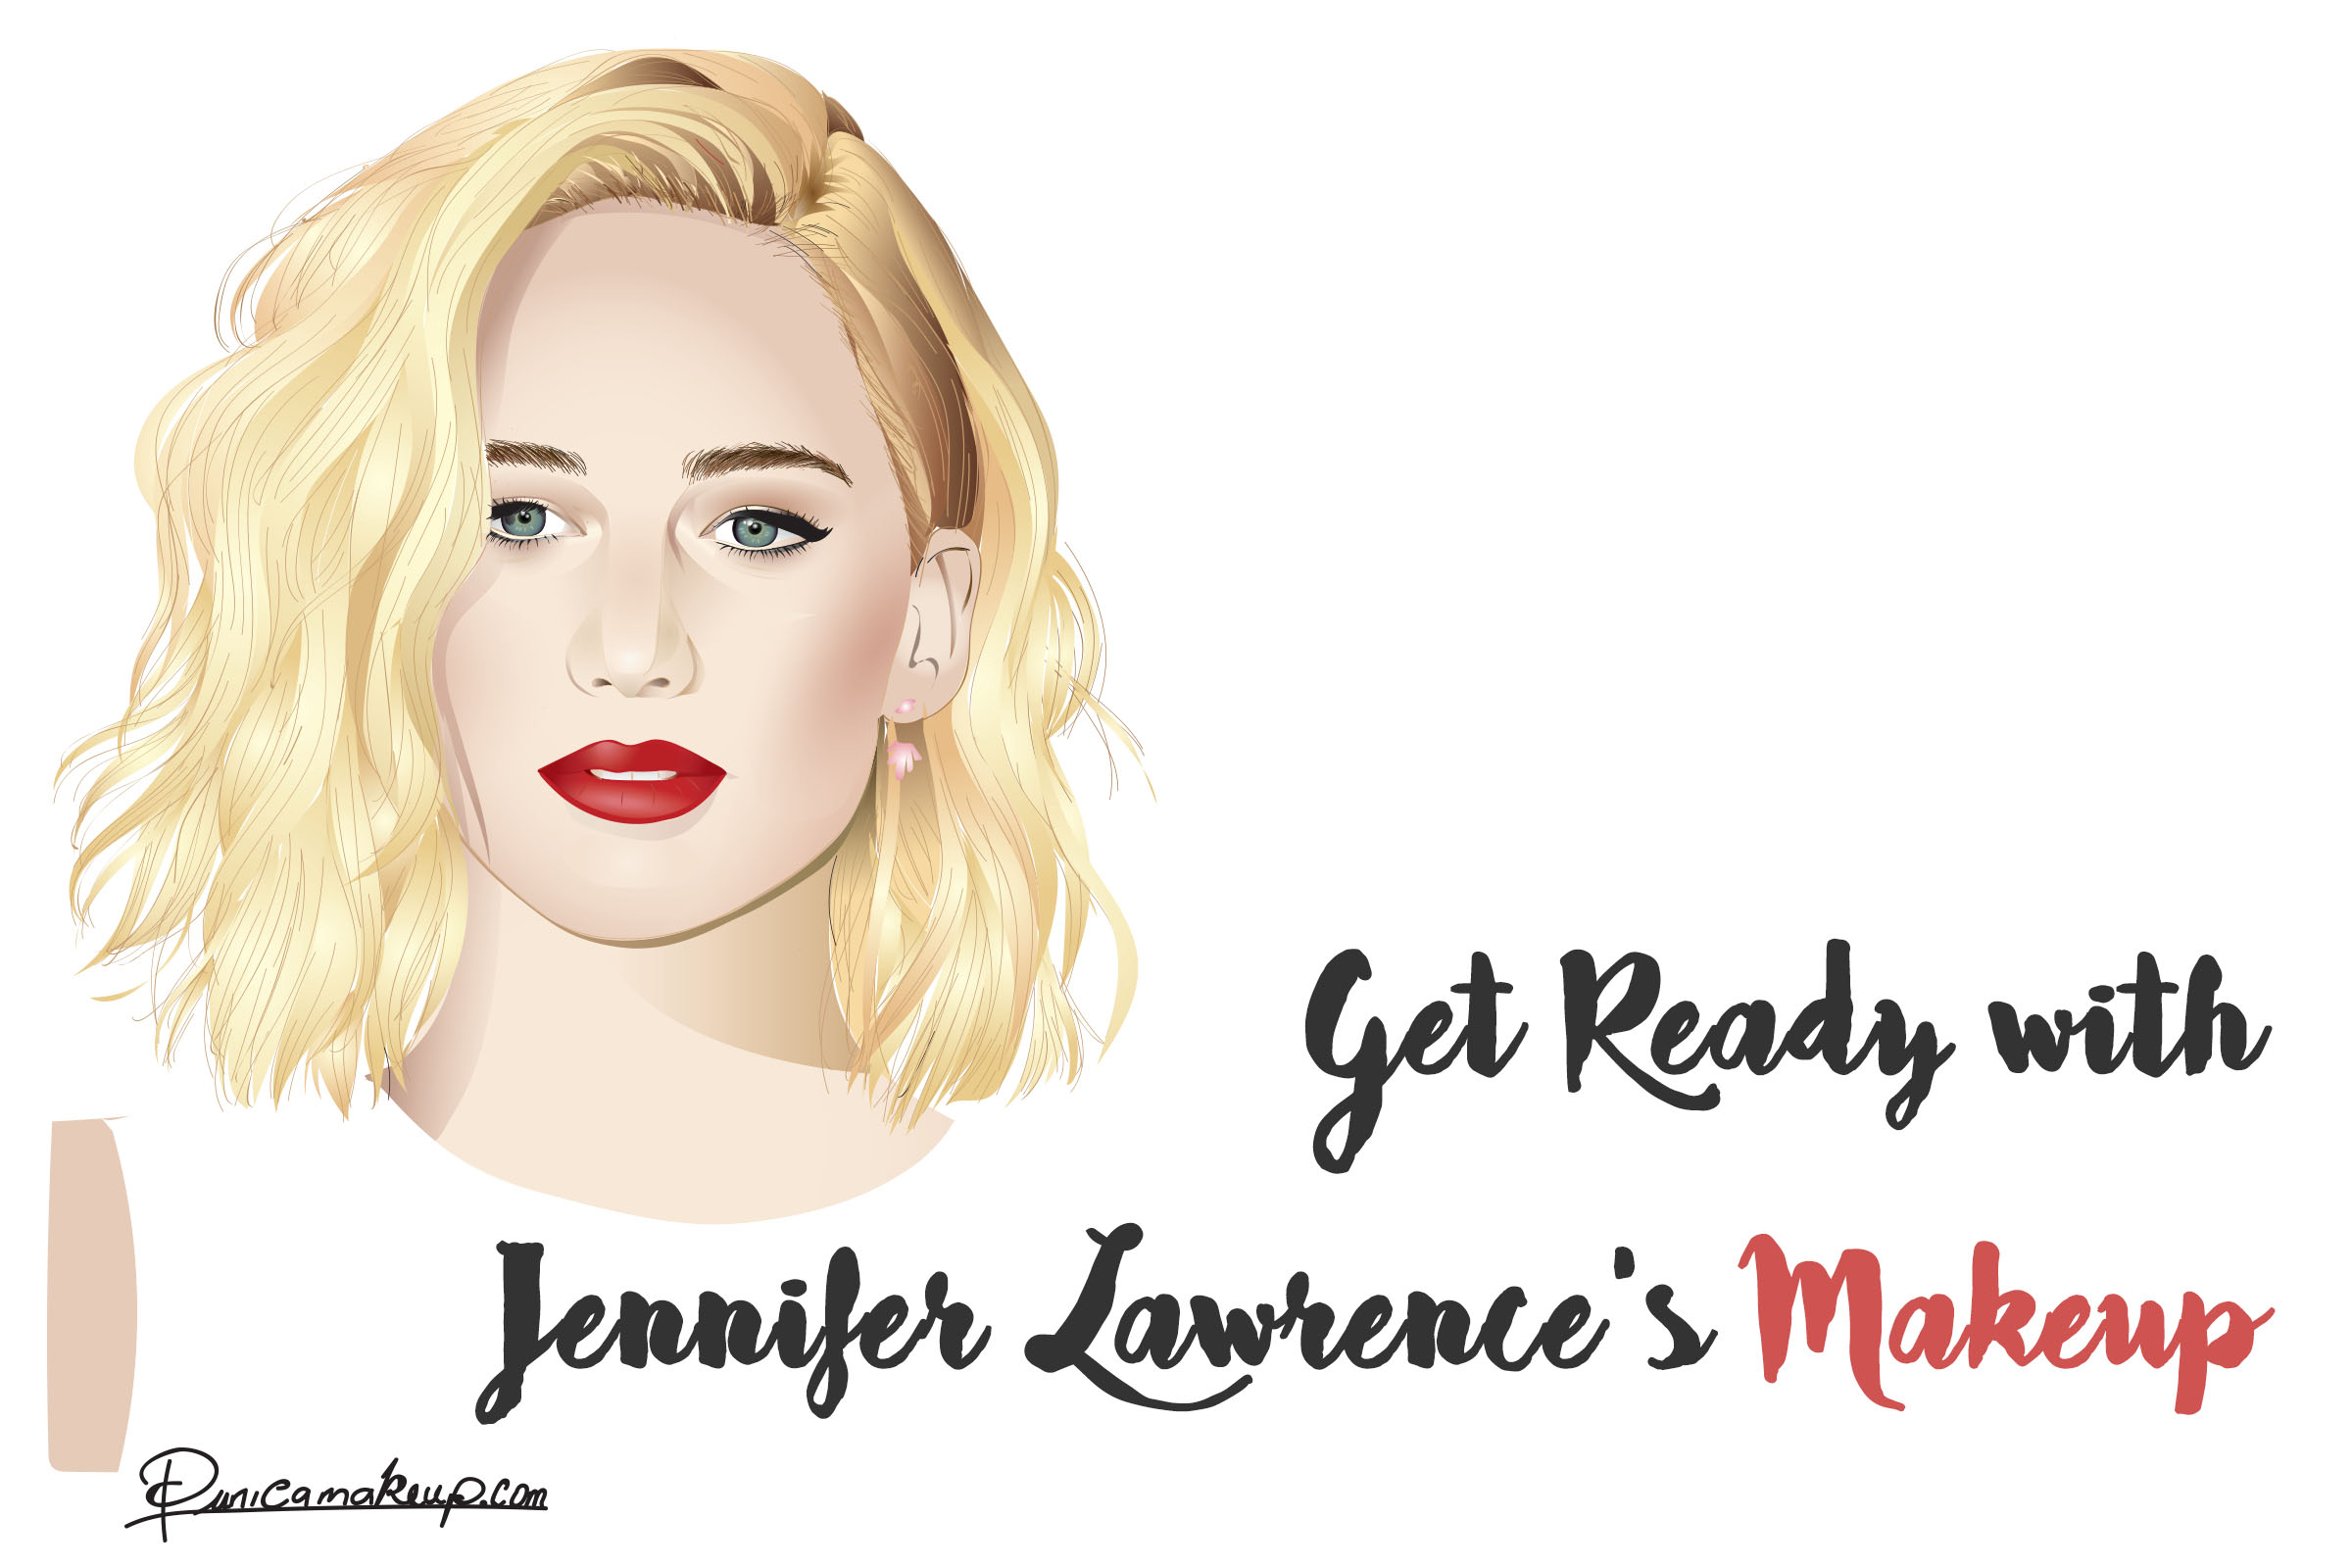 Get Ready with Jennifer Lawrence’s Makeup